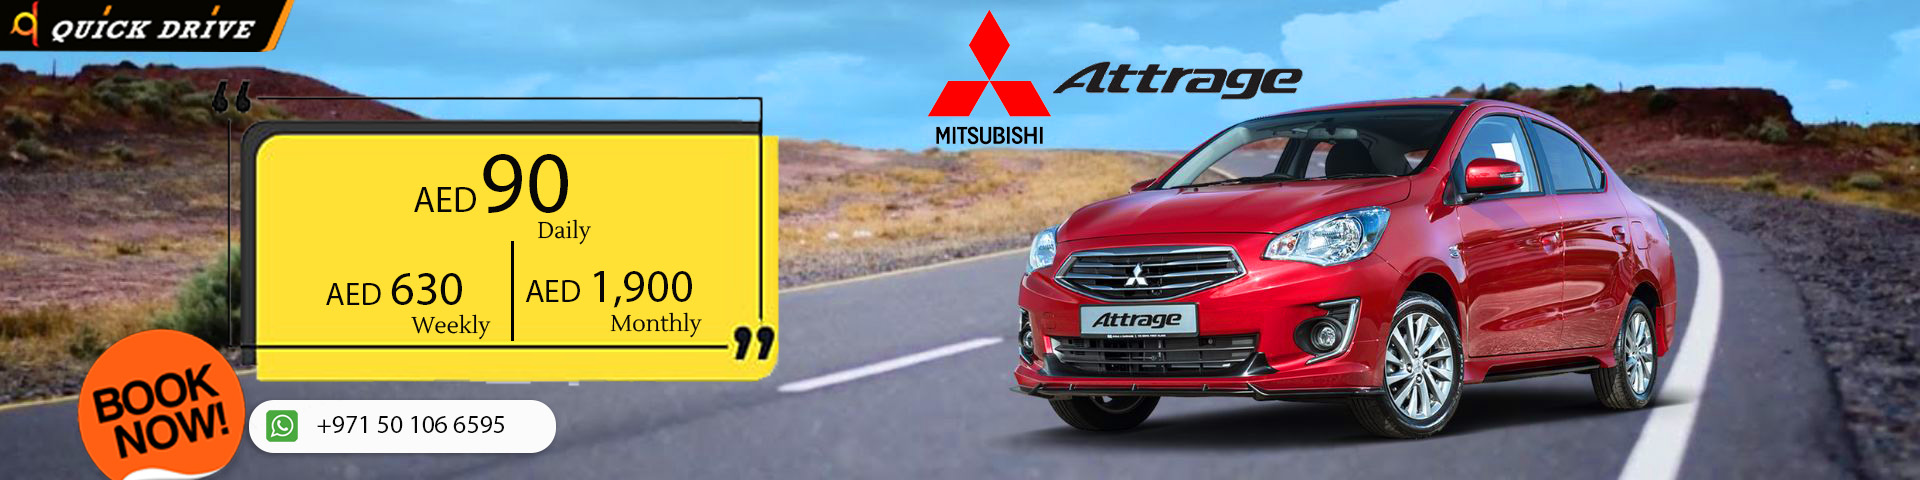 https://quickdrive.ae/uploads/promotions/promotion-attrage.jpg